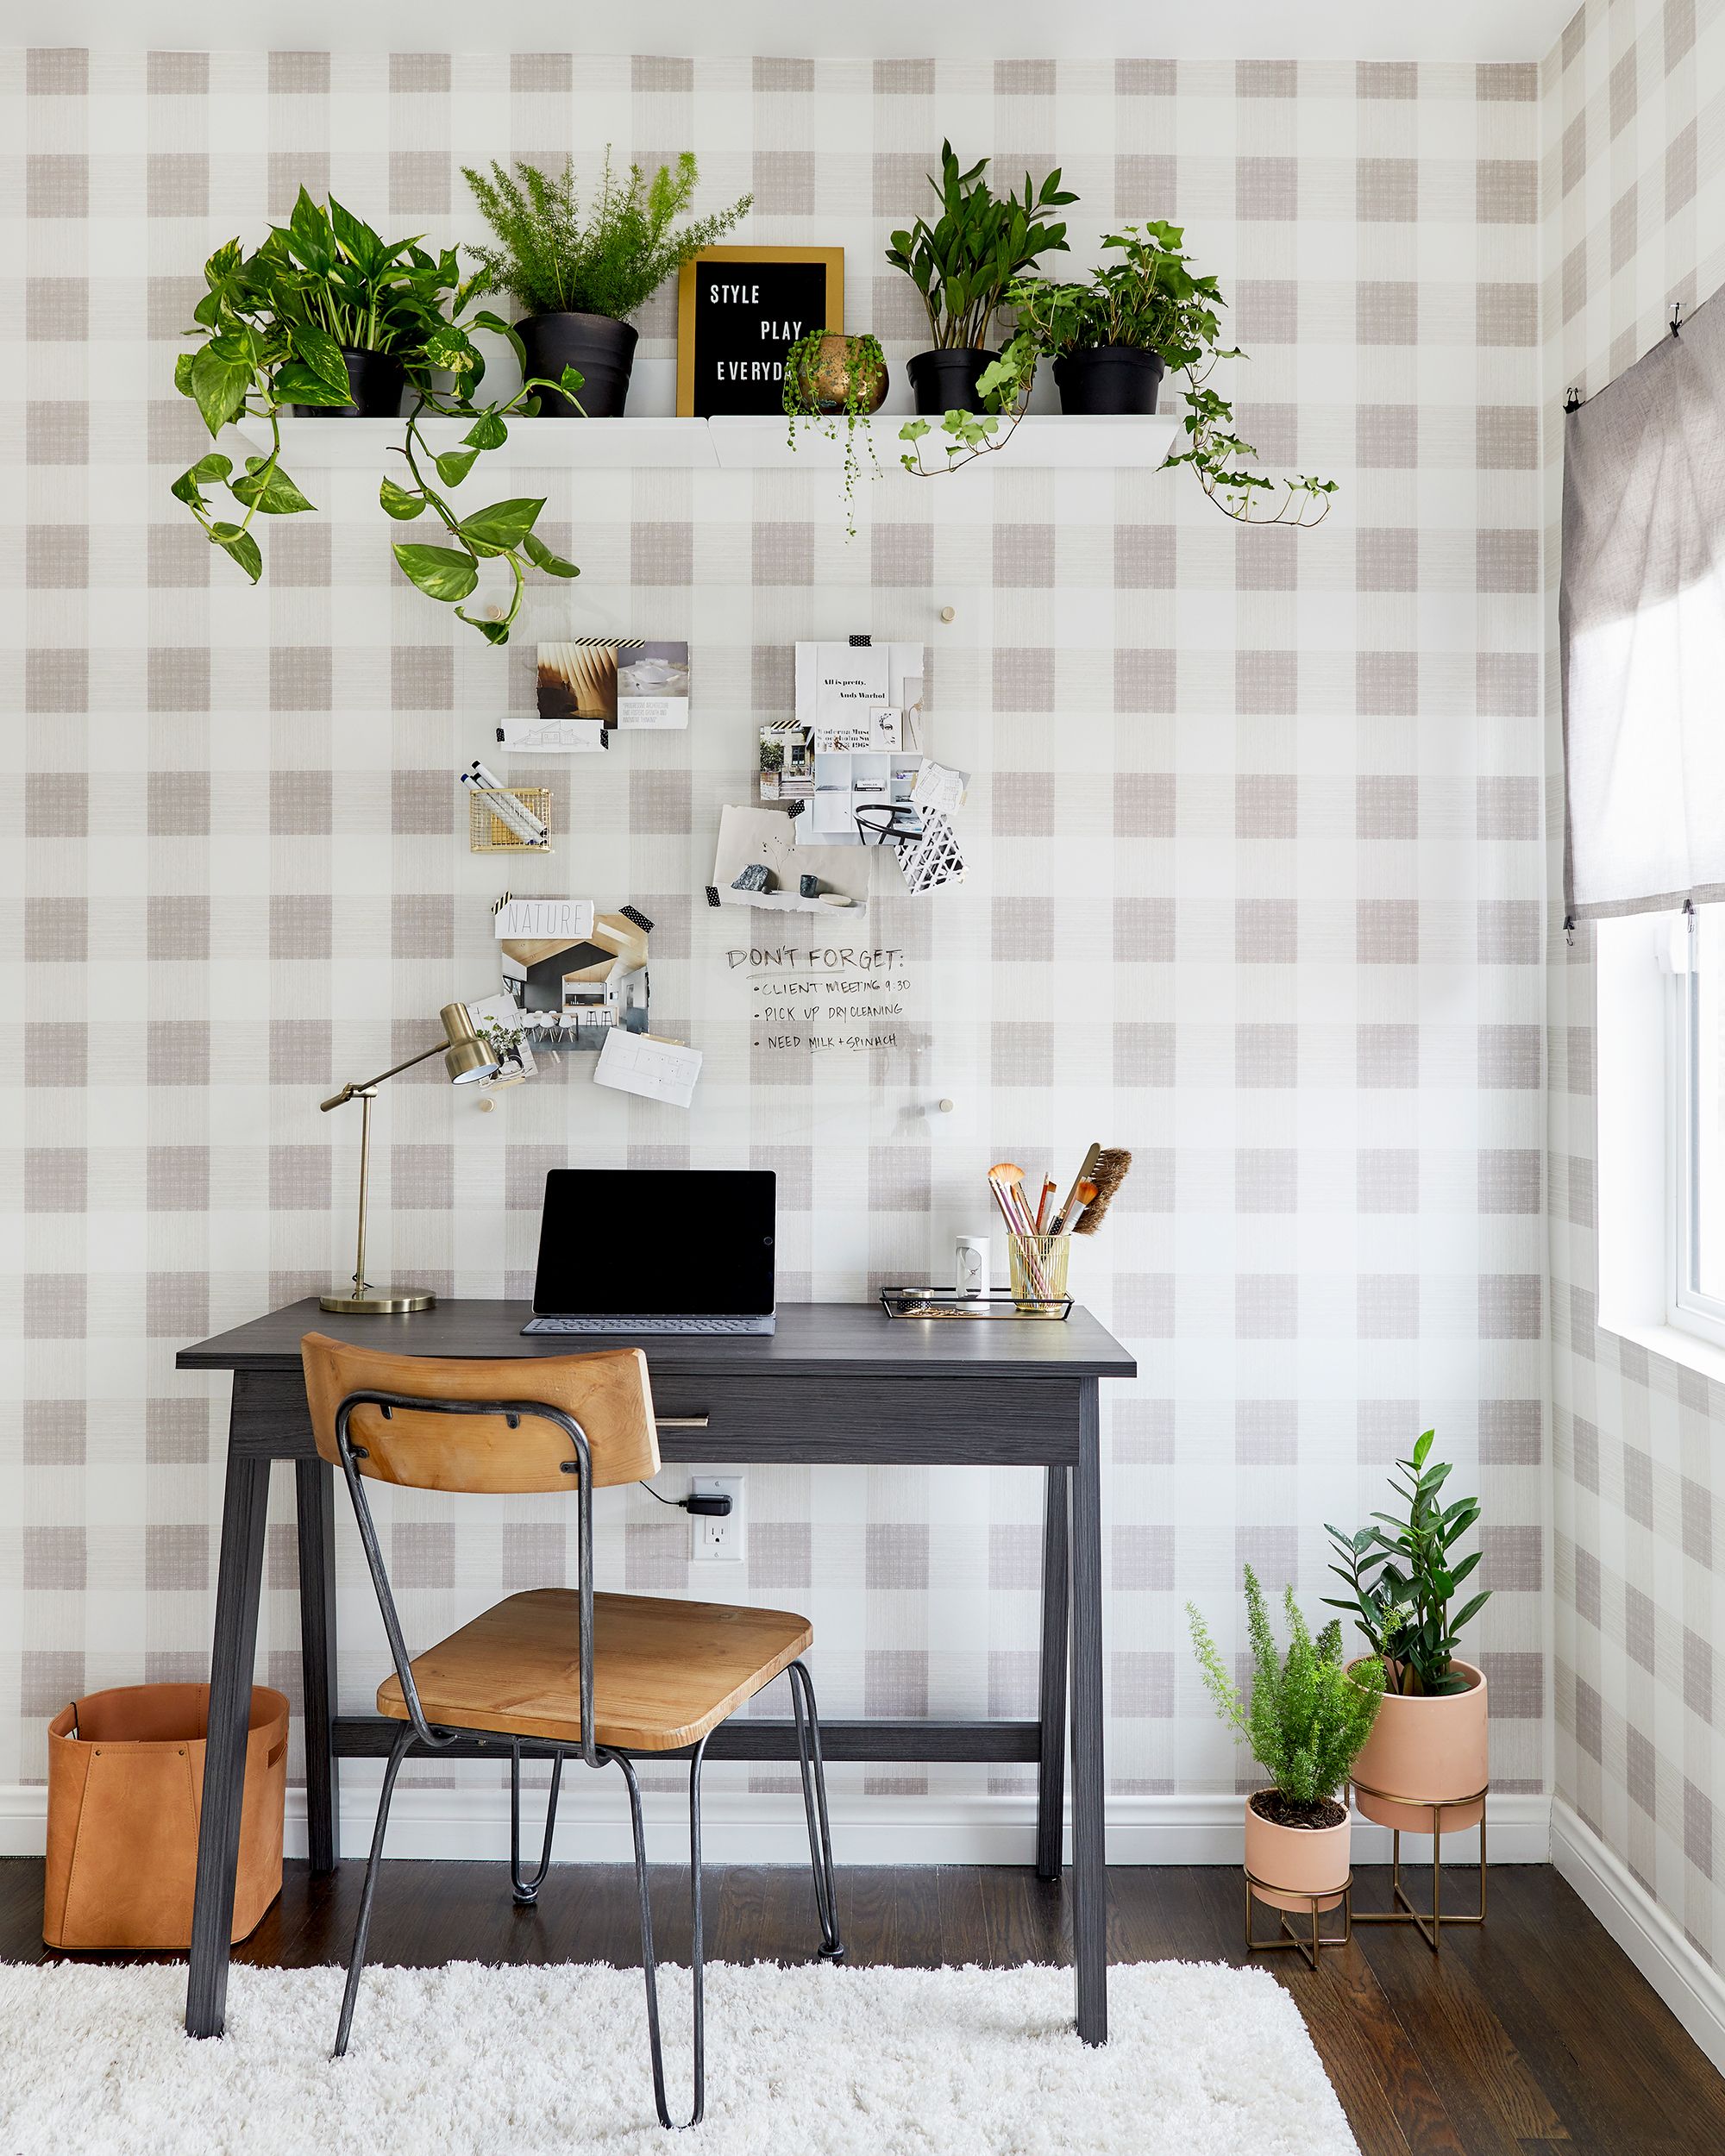 18 Insanely Awesome Home Office Organization Ideas